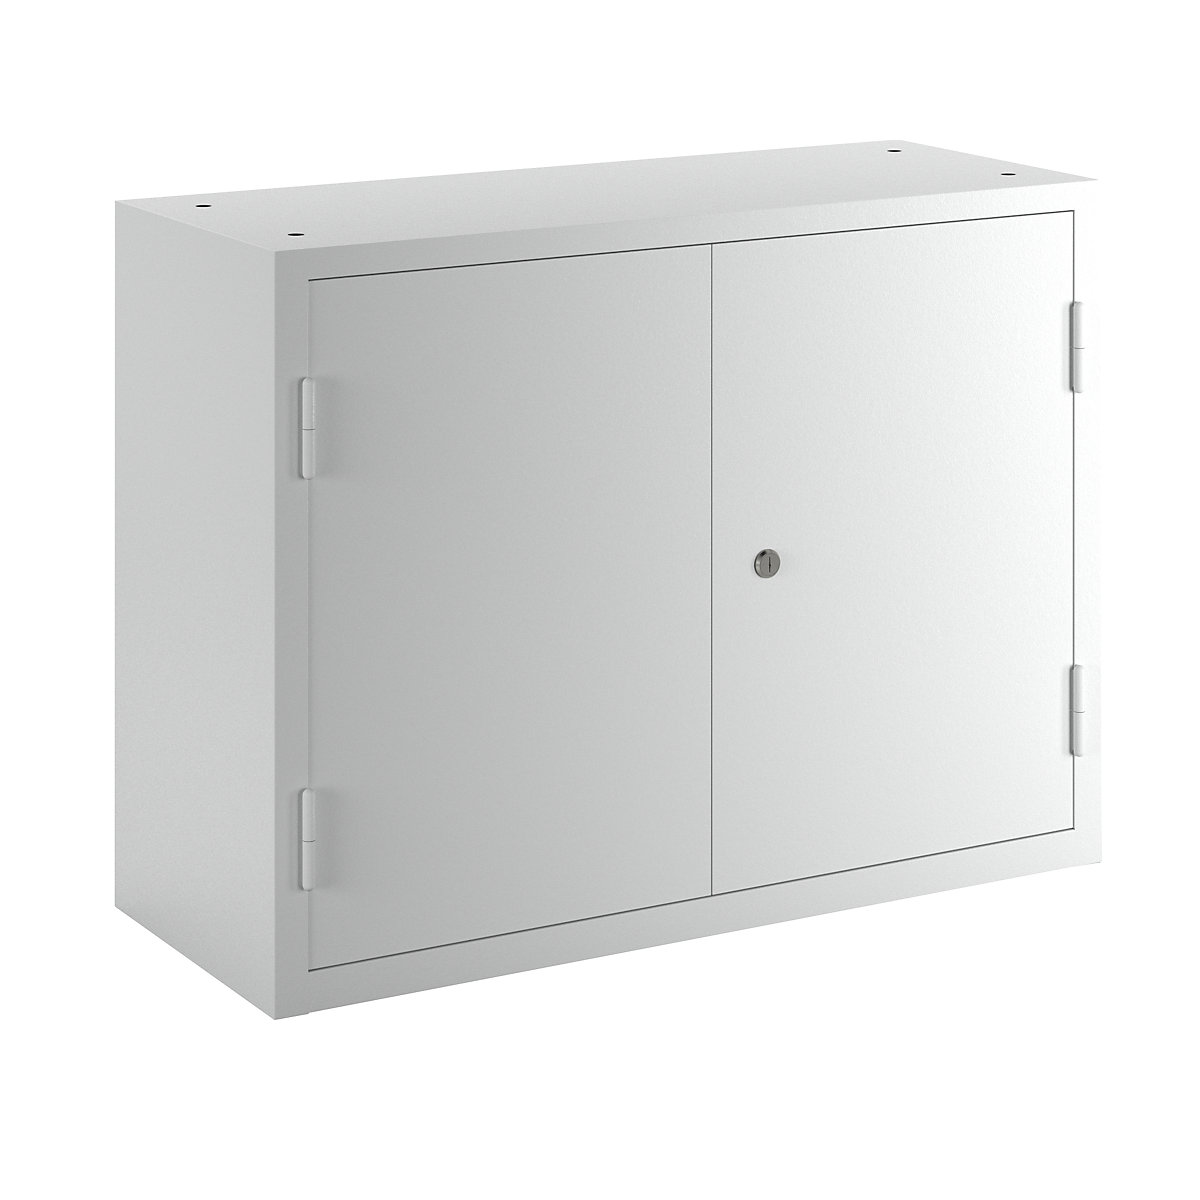 Wall mounted cupboard for the workshop – eurokraft basic, HxWxD 600 x 800 x 320 mm, solid panel doors, light grey RAL 7035-6